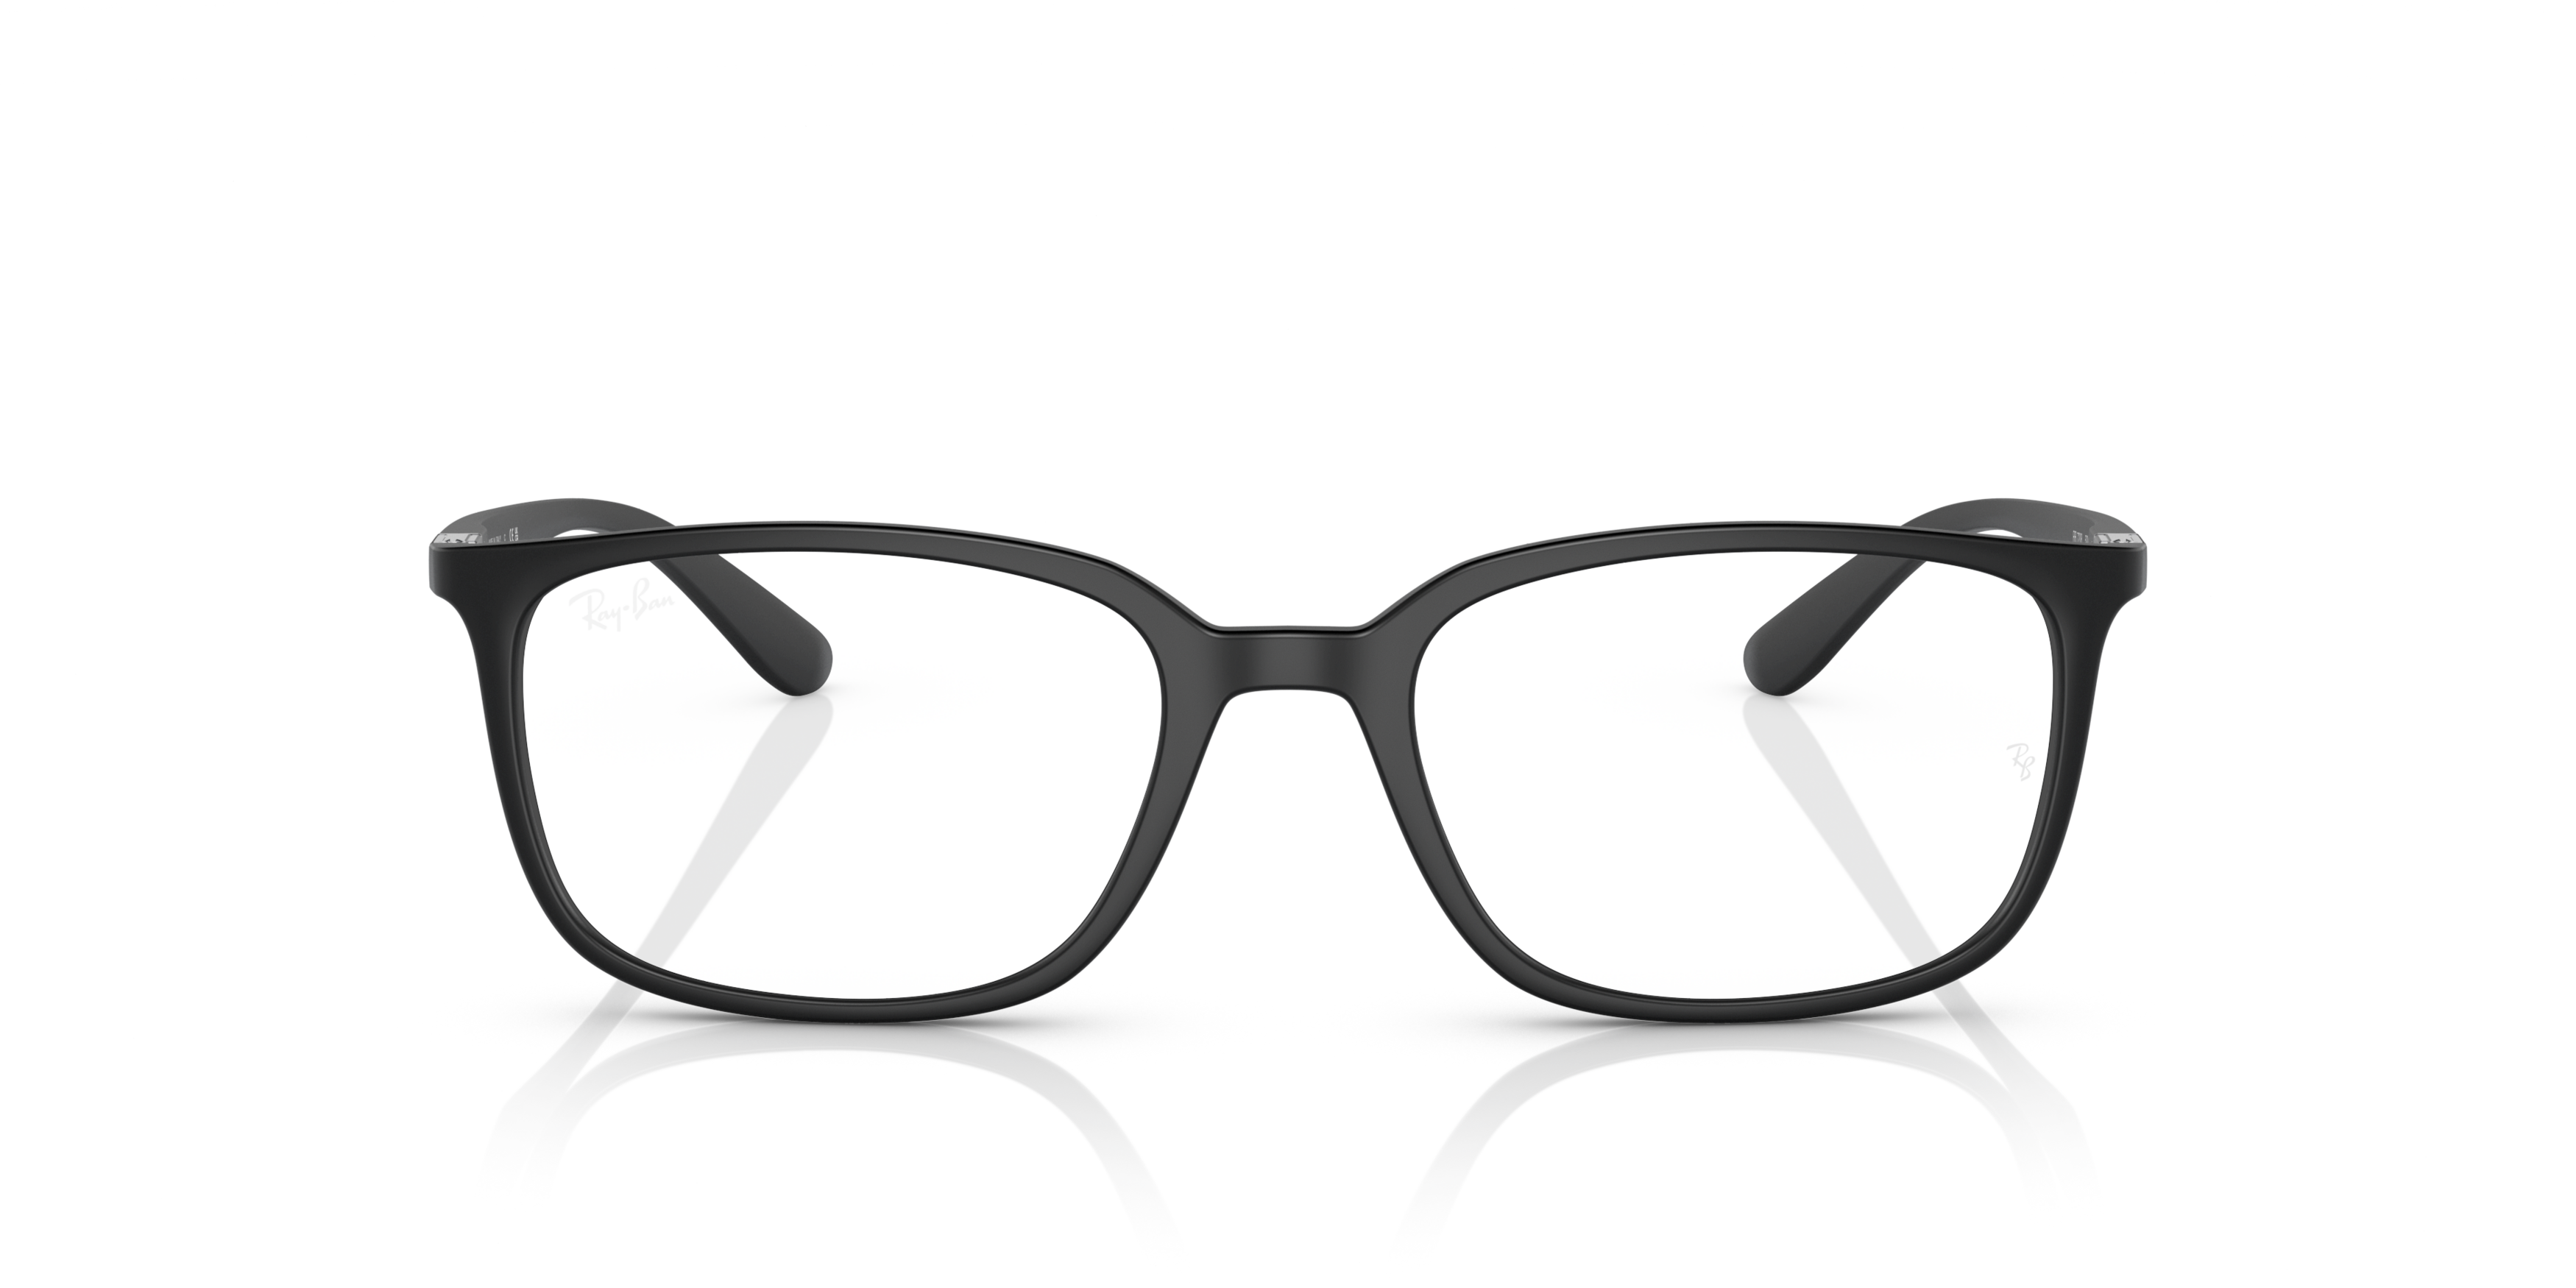 Front Ray-Ban RX 7208 Glasses Transparent / Black